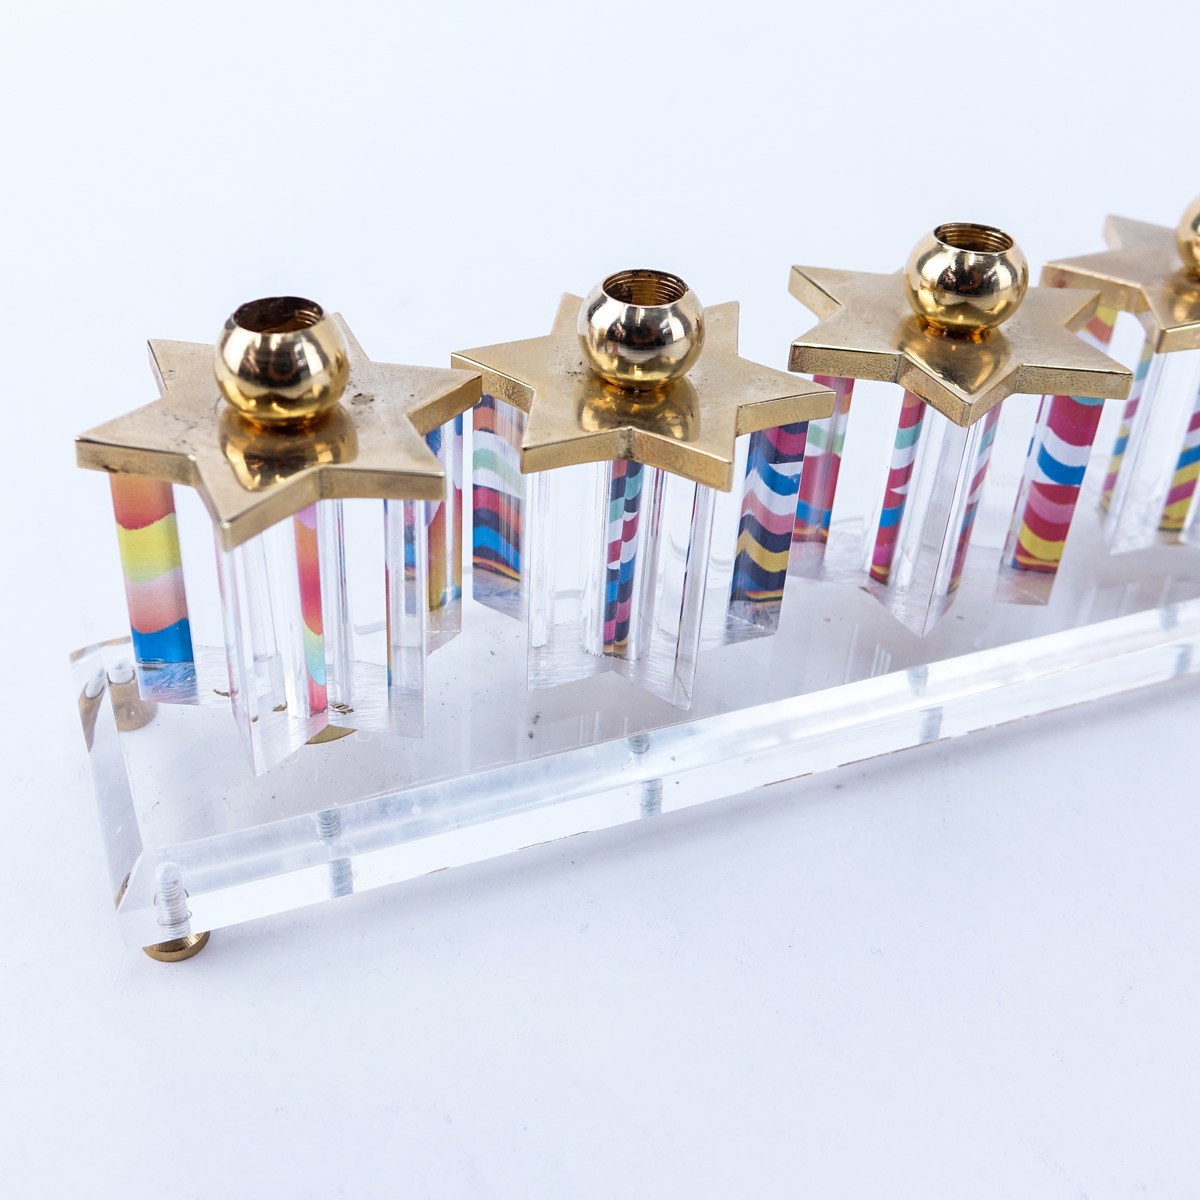 Grouping of Five (5): Large Lucite and Brass Menorah,   Four Lucite and Brass Dreidels. All made by Jerusalem Crystalight in commemoration of Israel's 50 year anniversary.